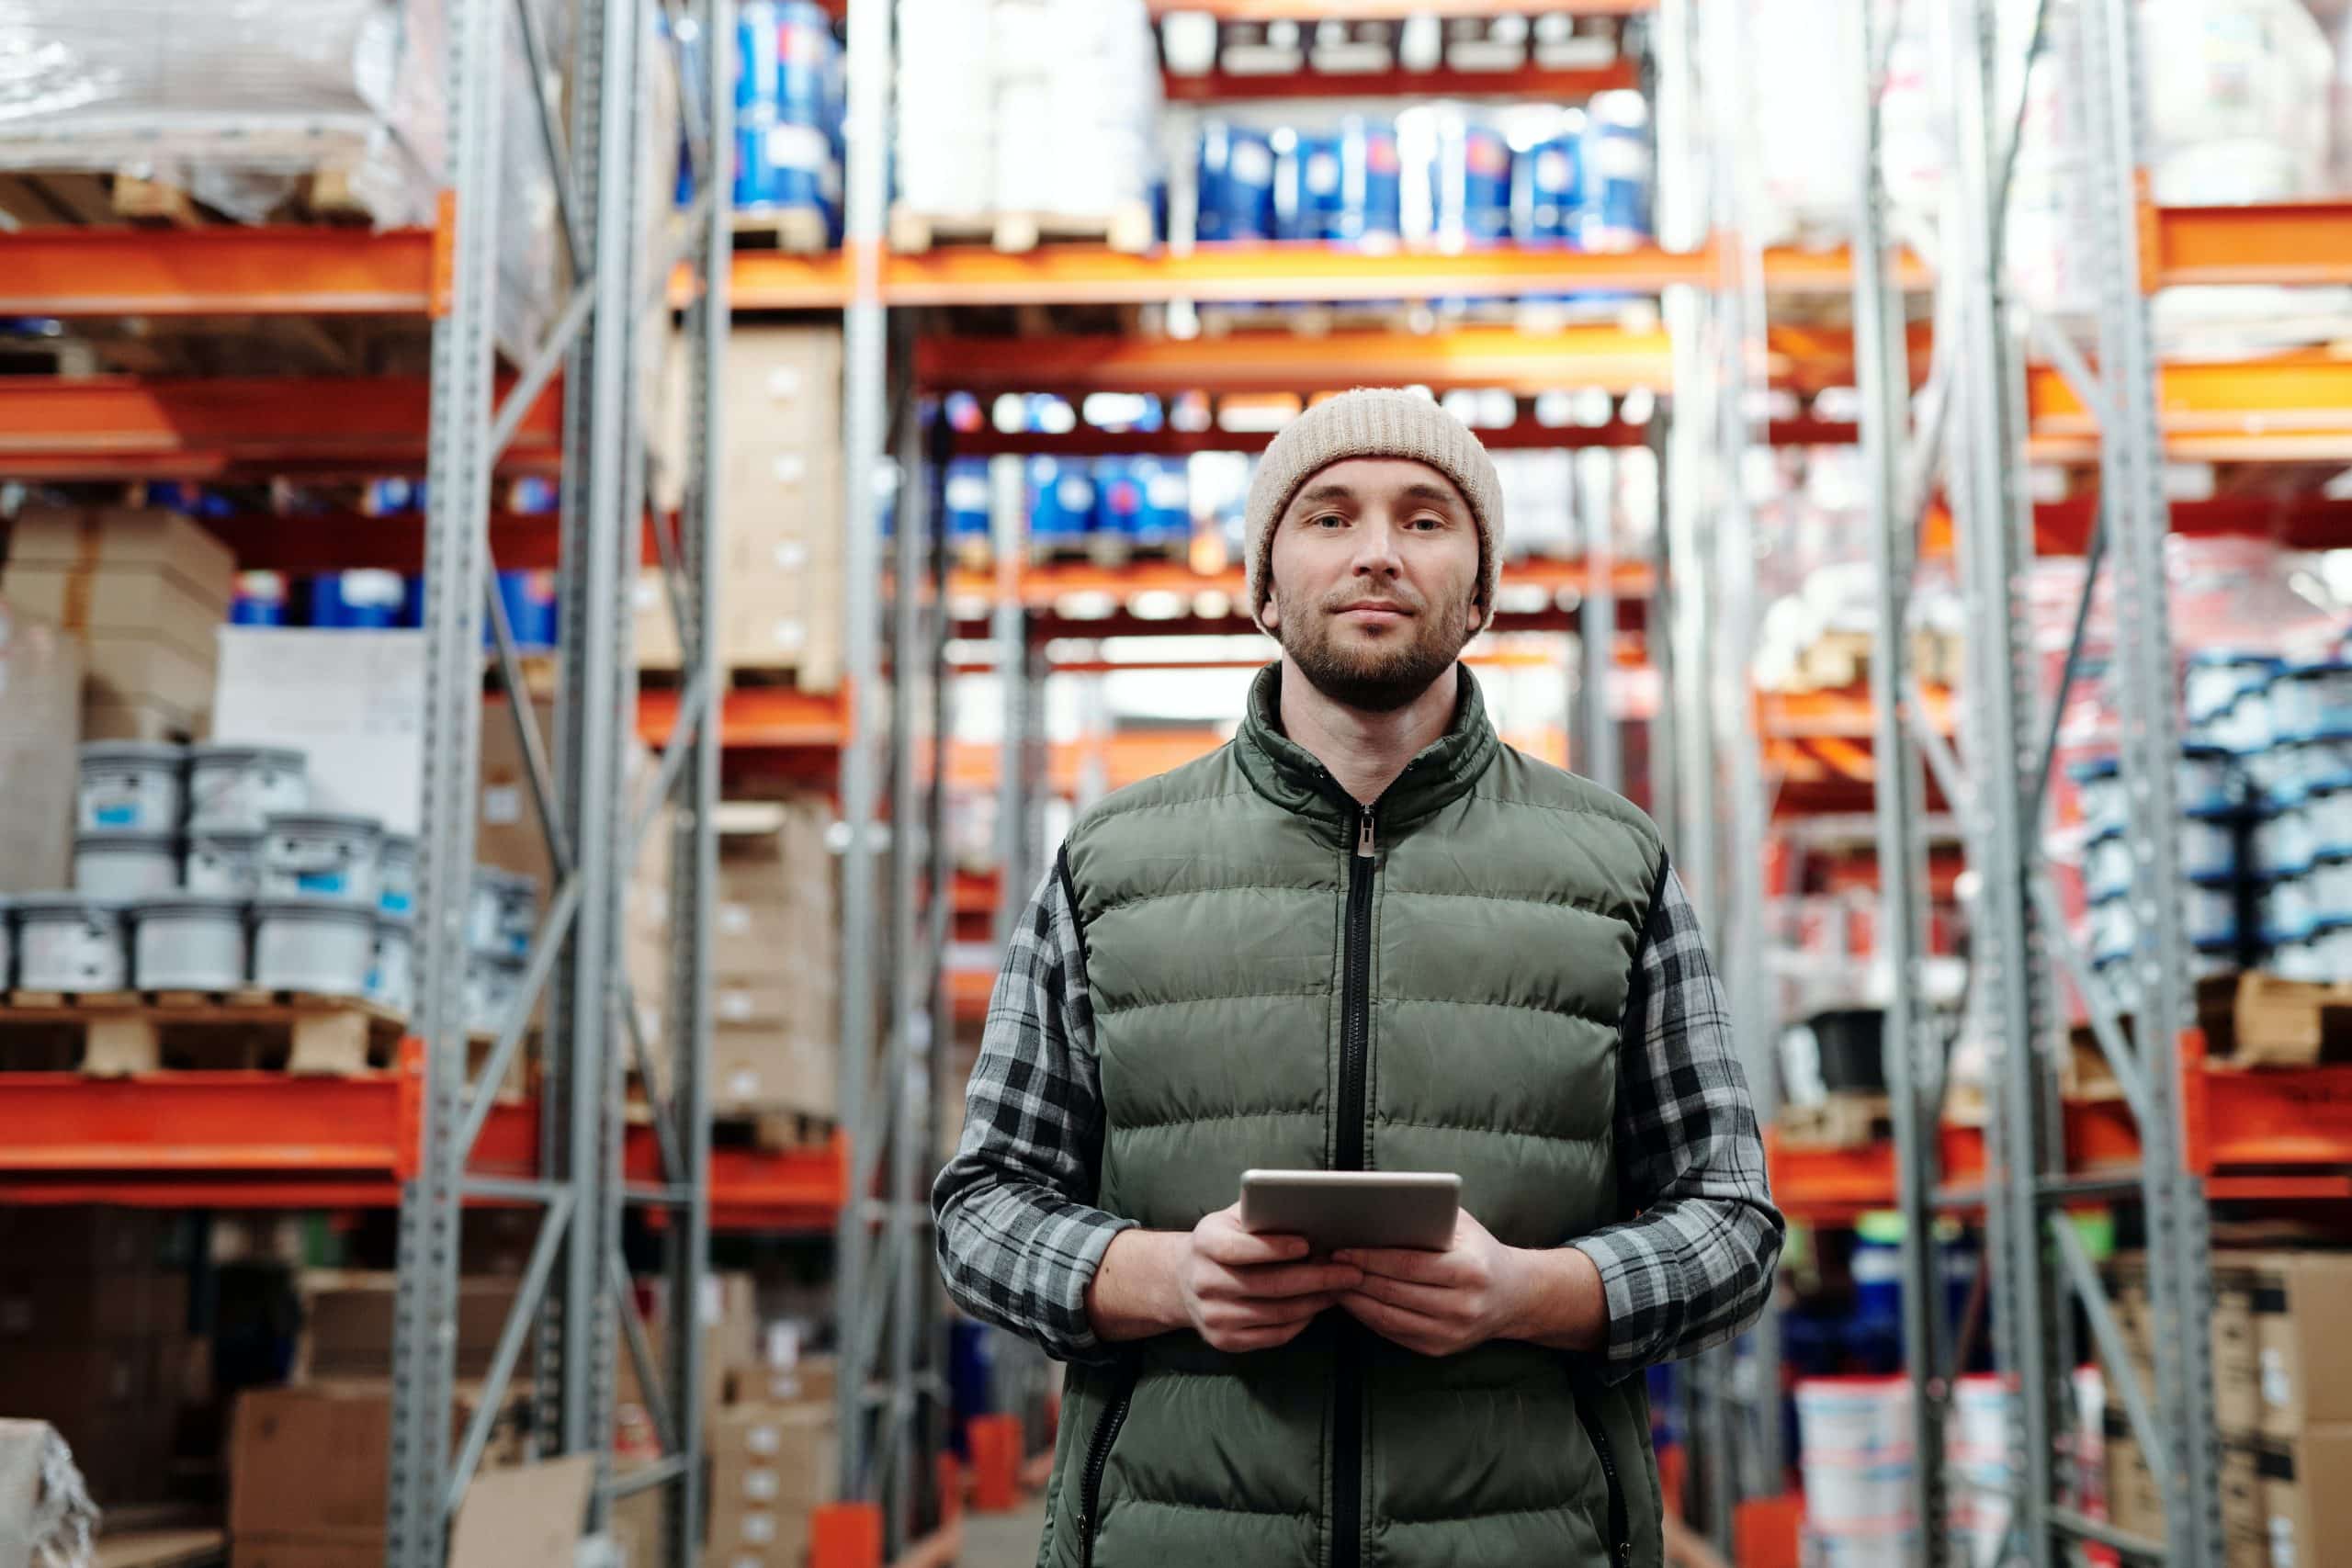 A man in a beanie and vest holds a tablet and smiles at the camera, standing in a warehouse with shelves stocked with goods, possibly engaged in a temperature mapping process.